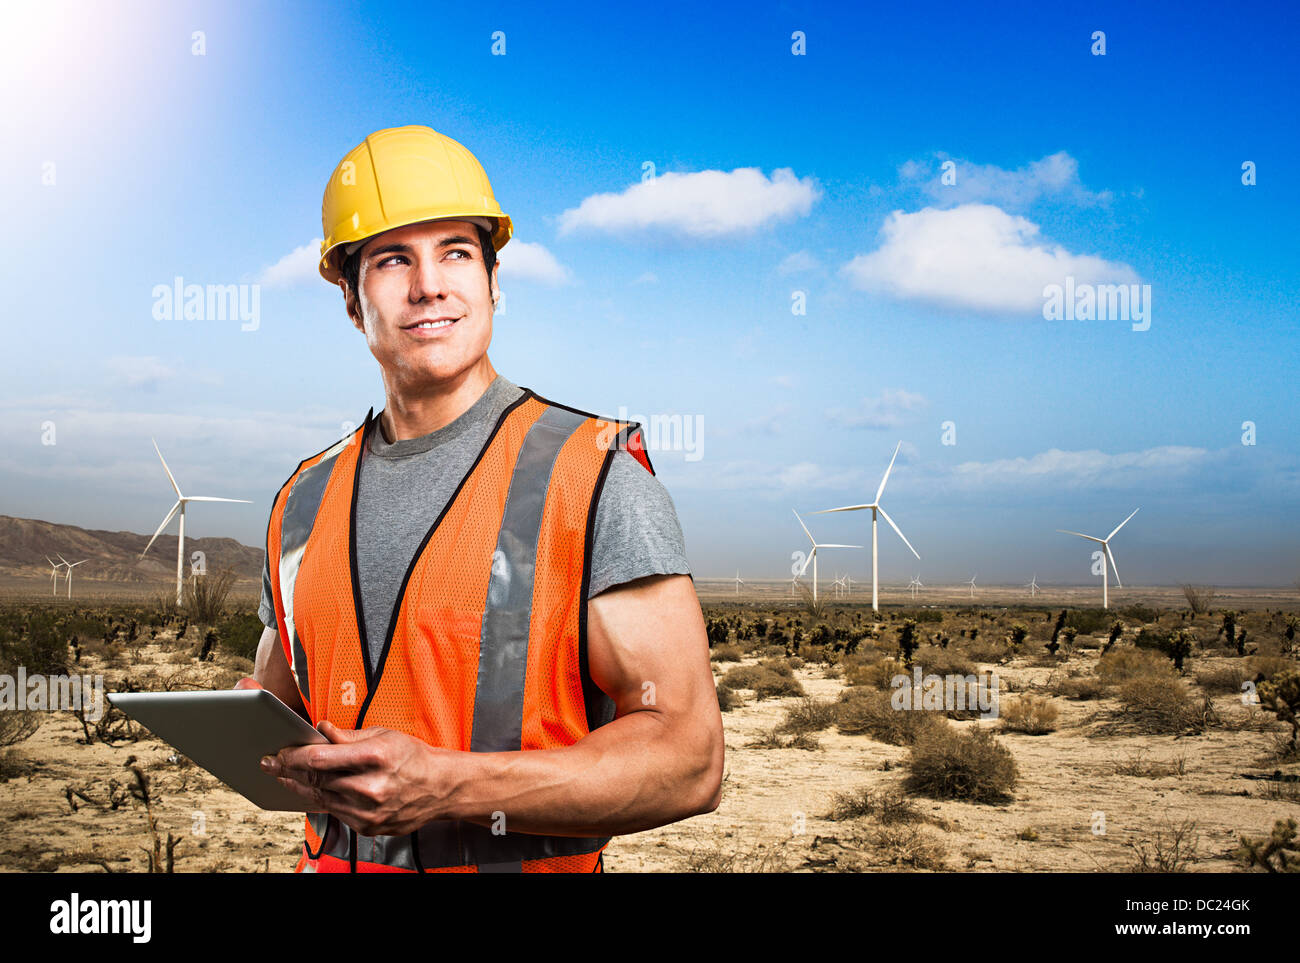 Man standing in front of wind farm Stock Photo